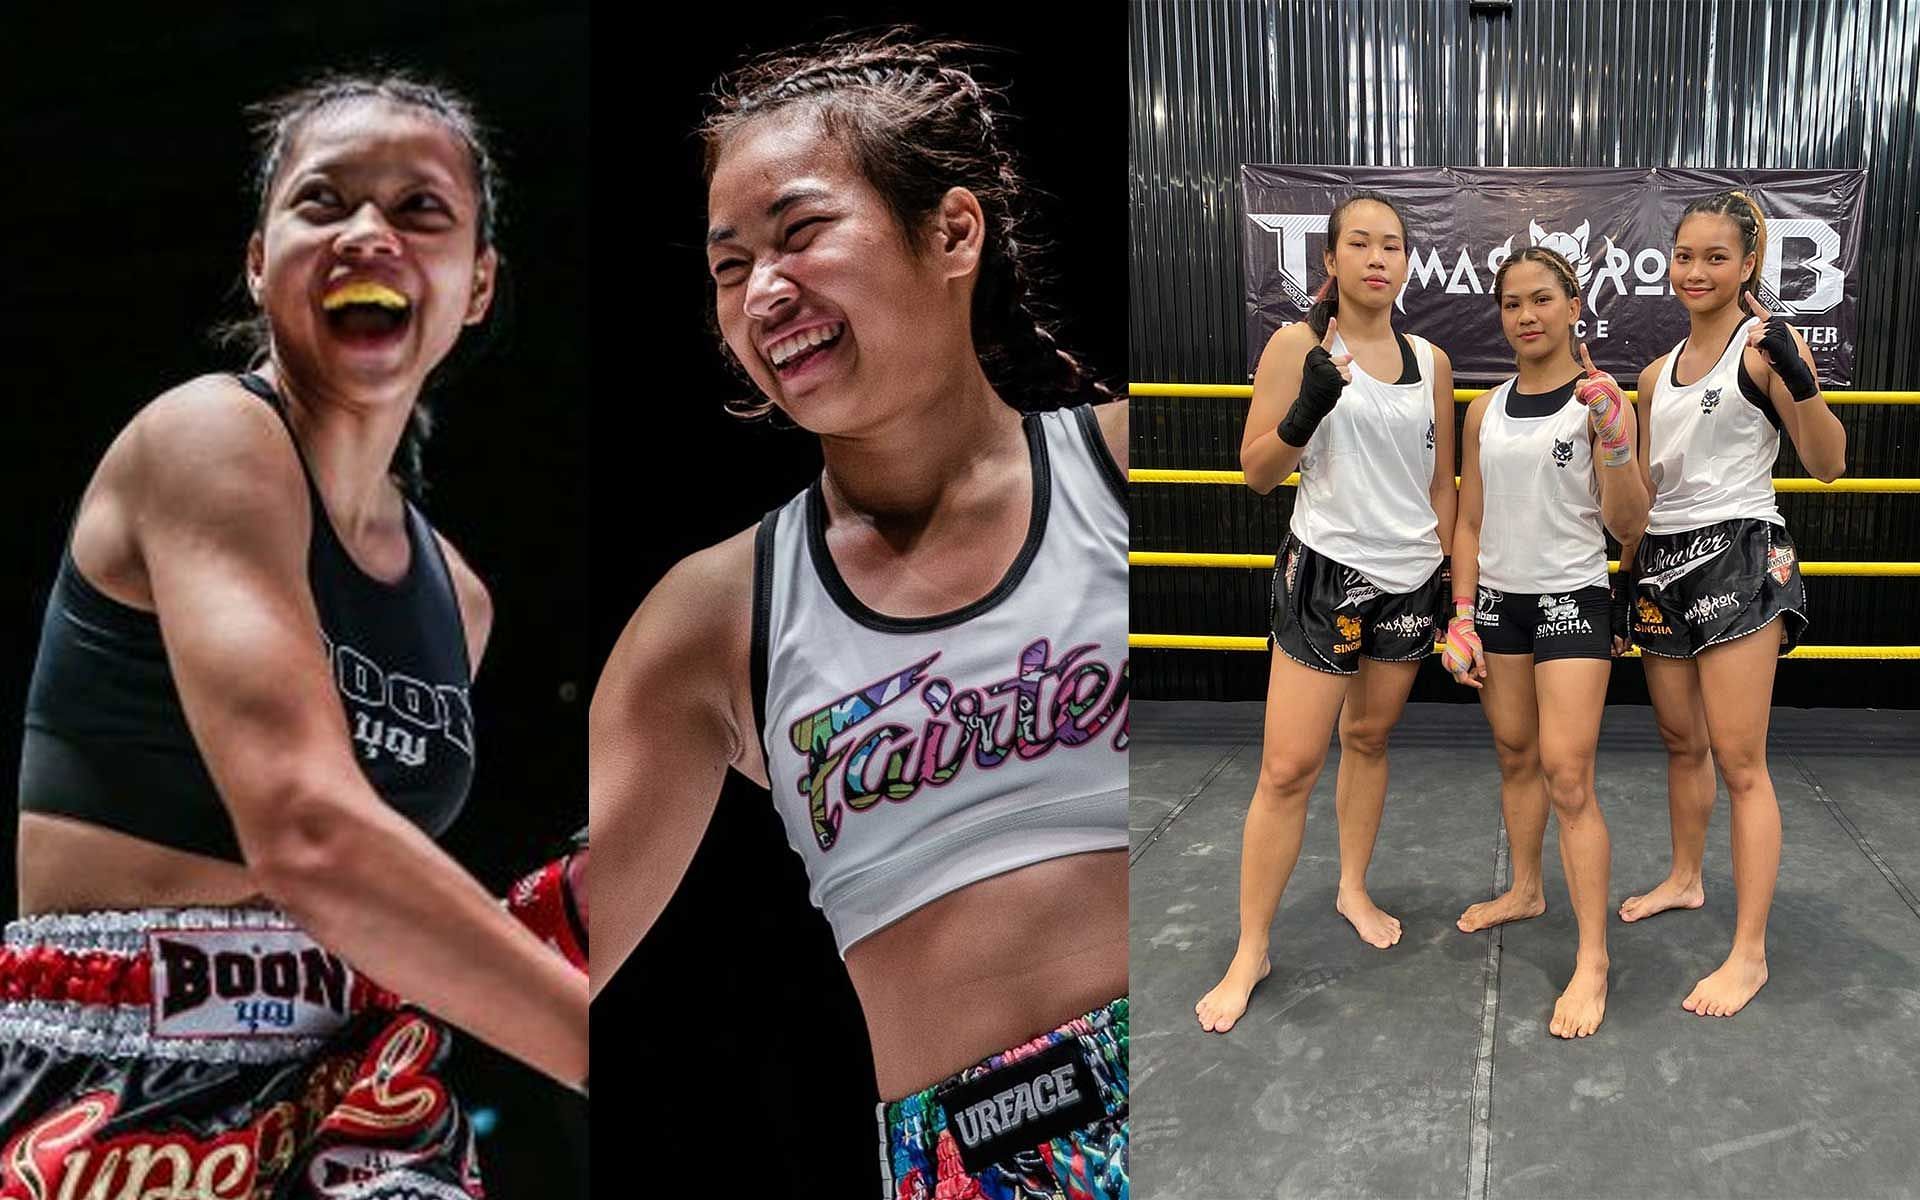 Sisters Supergirl (left) and Wondergirl (right) join Marrok Force MMA [Photo: ONE Championship]